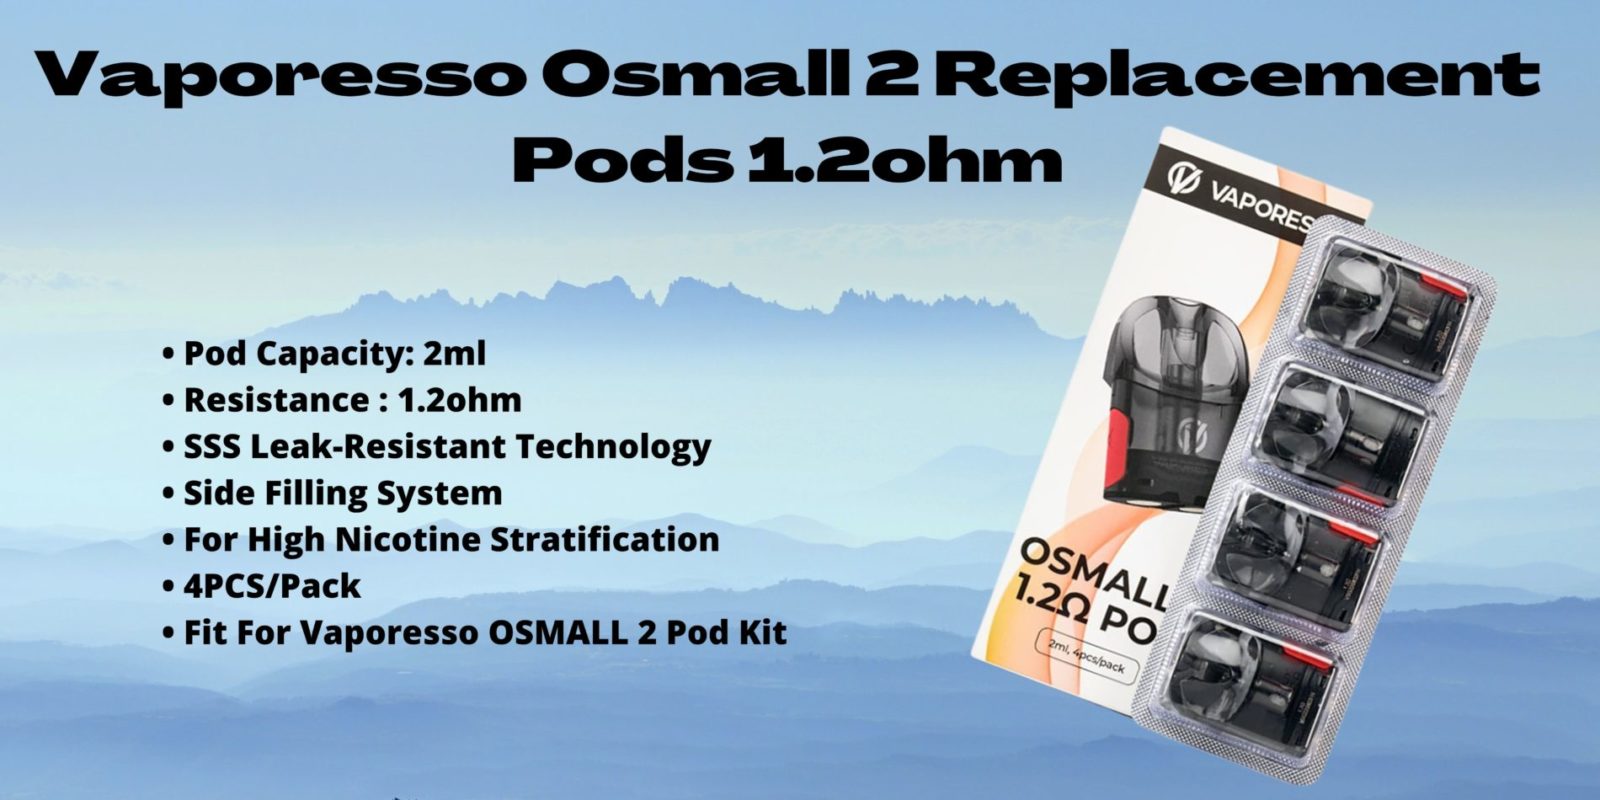 Vaporesso Osmall 2 Replacement Pods 1.2ohm VAPING - XMANIA Ireland 11